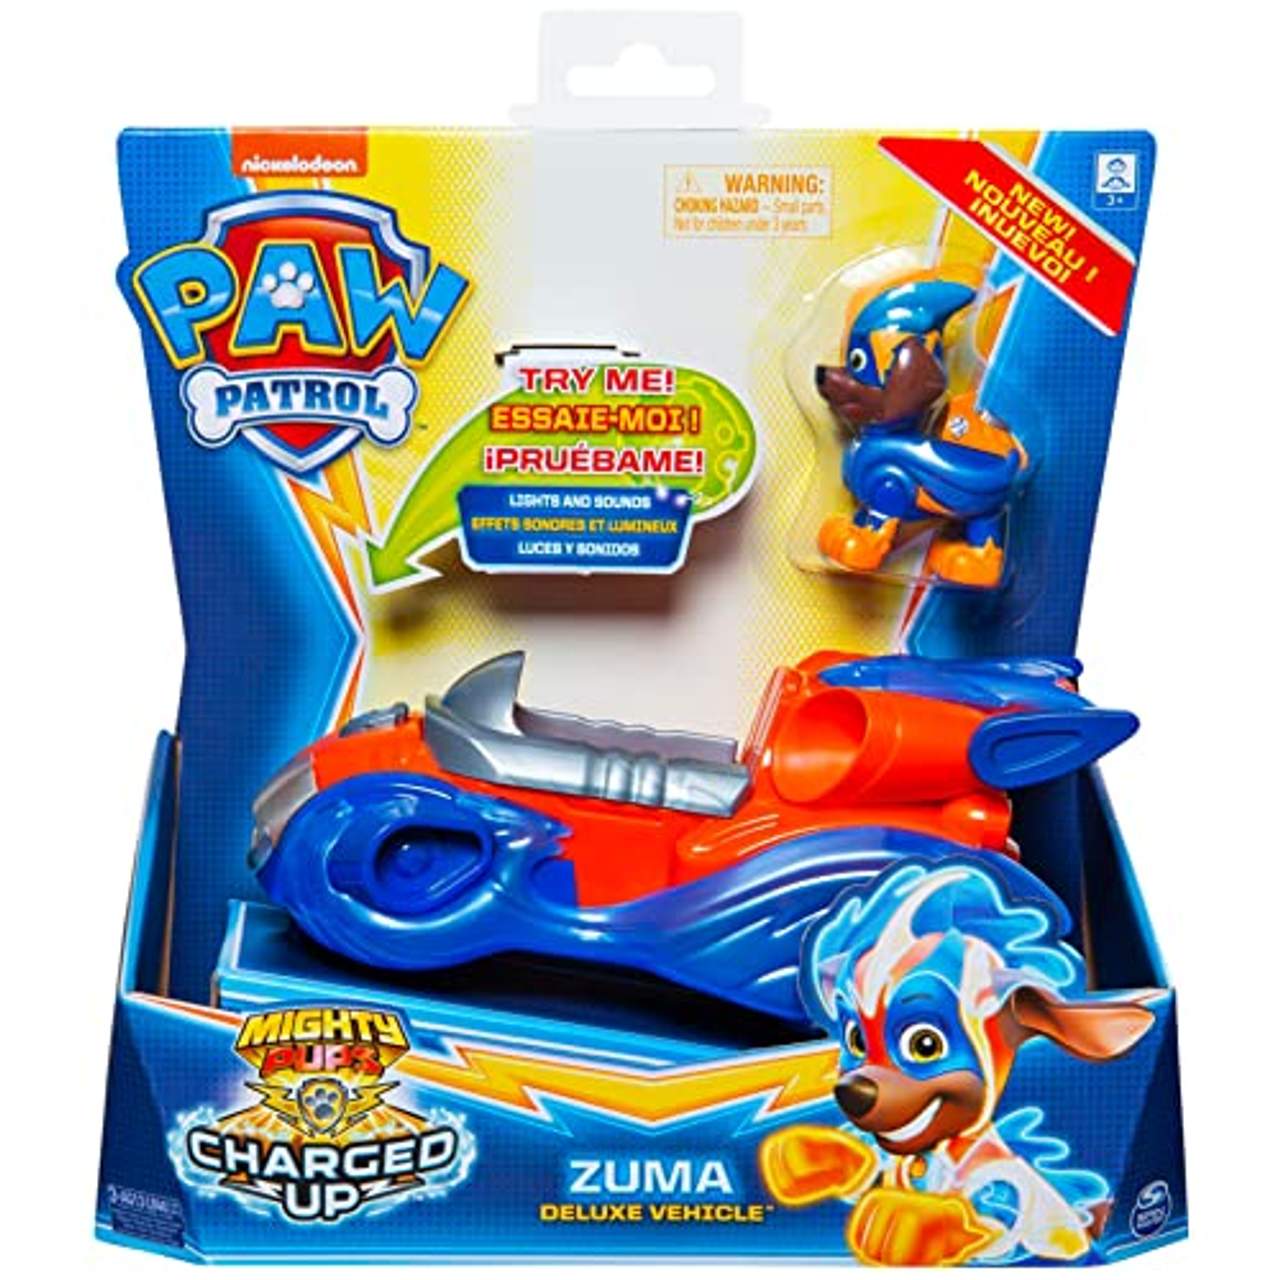 Paw Patrol 6056876 Mighty Pups Charged Up Zuma's Deluxe Fahrzeug